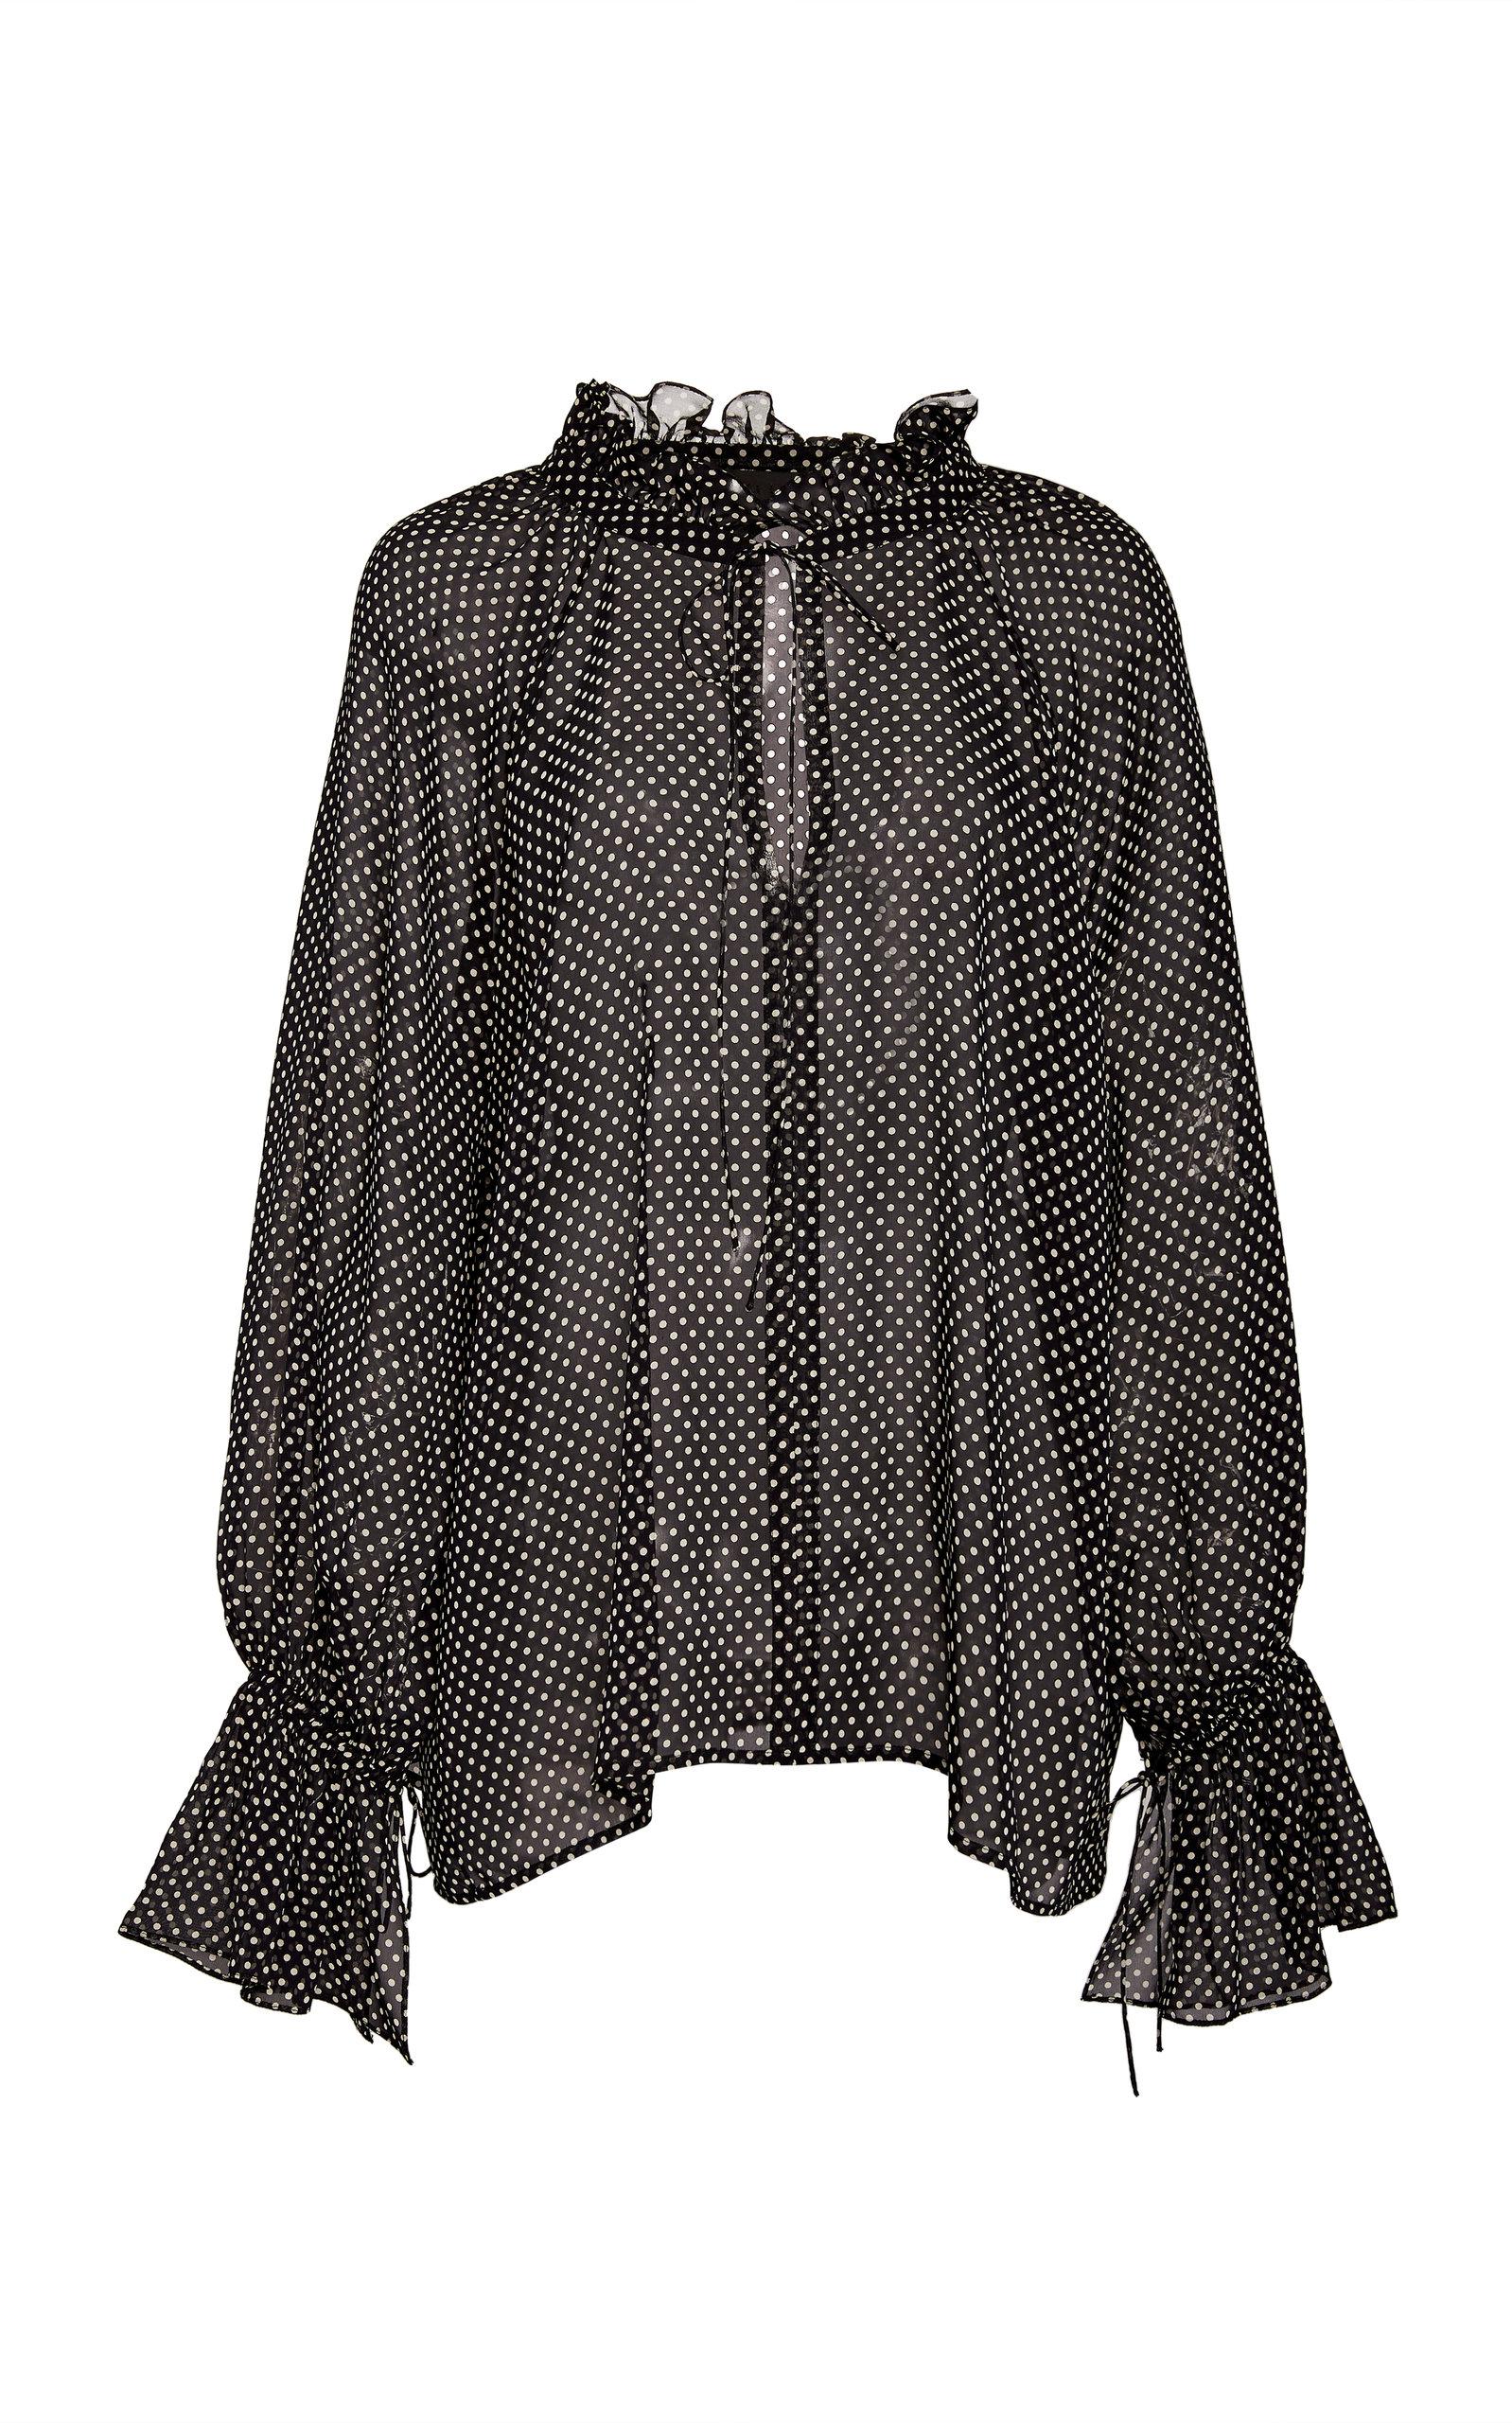 Nili Lotan Royan Blouse In Black And Ivory Dots | Lyst